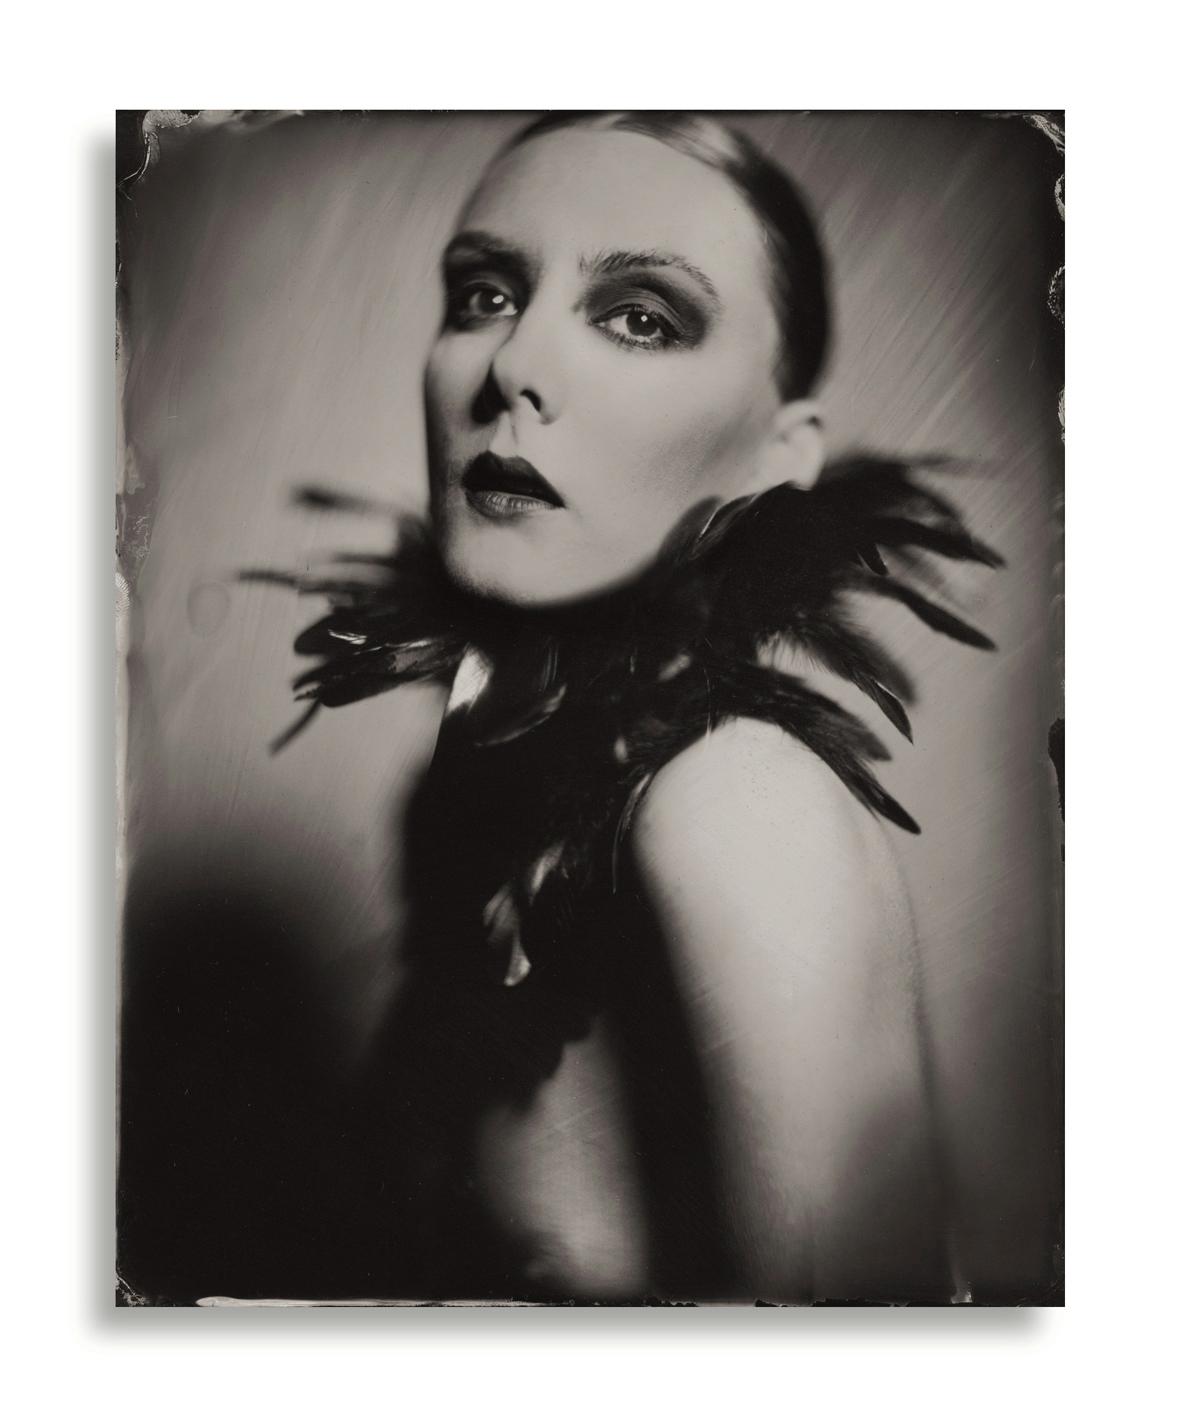 Dave King – Brooke / Collodion photo